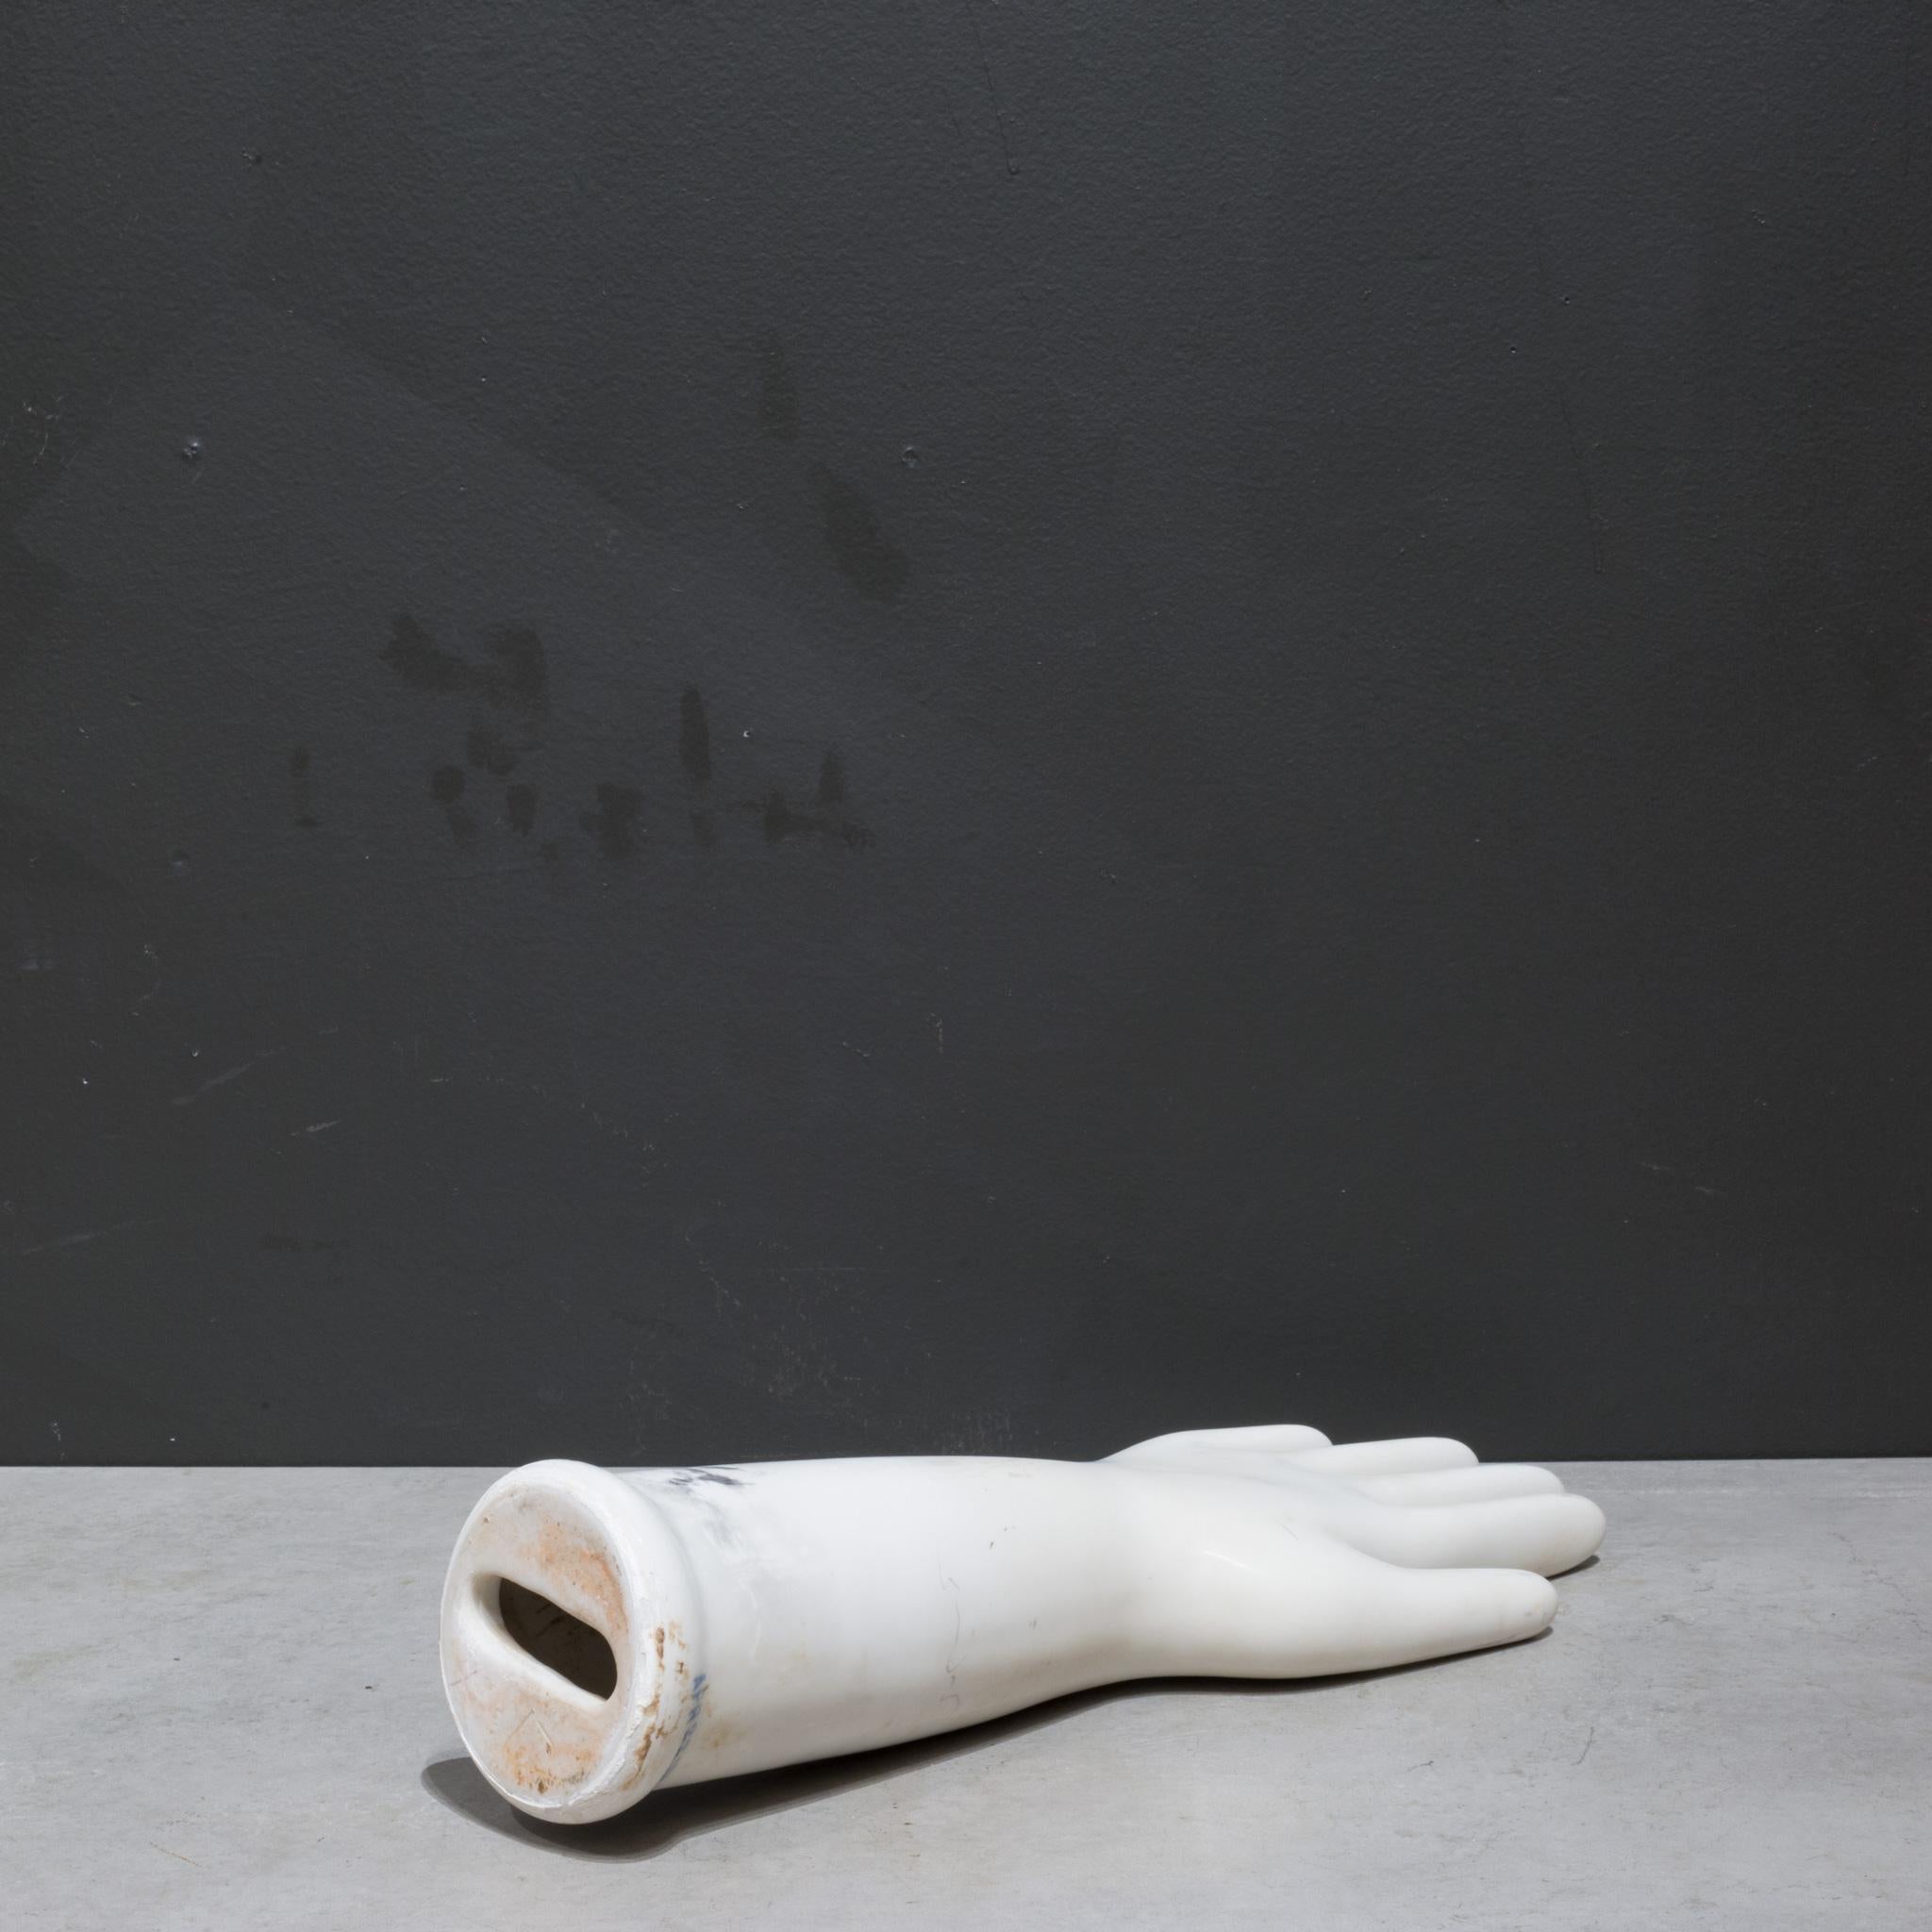 Large Glazed Porcelain Factory Rubber Glove Mold, C.1991  (FREE SHIPPING) In Good Condition For Sale In San Francisco, CA